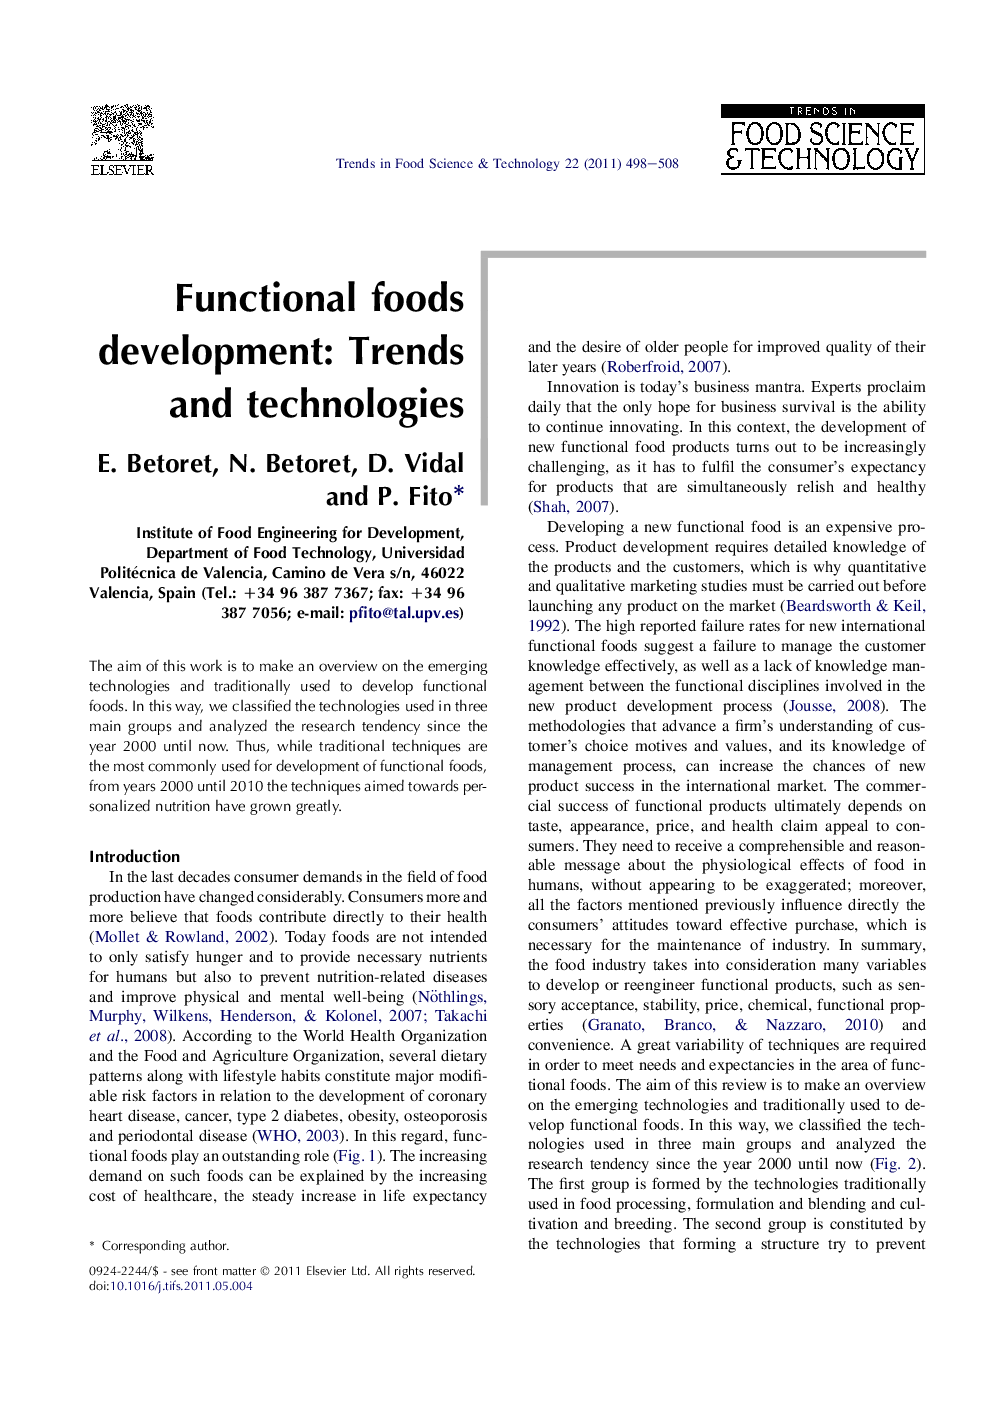 Functional foods development: Trends and technologies